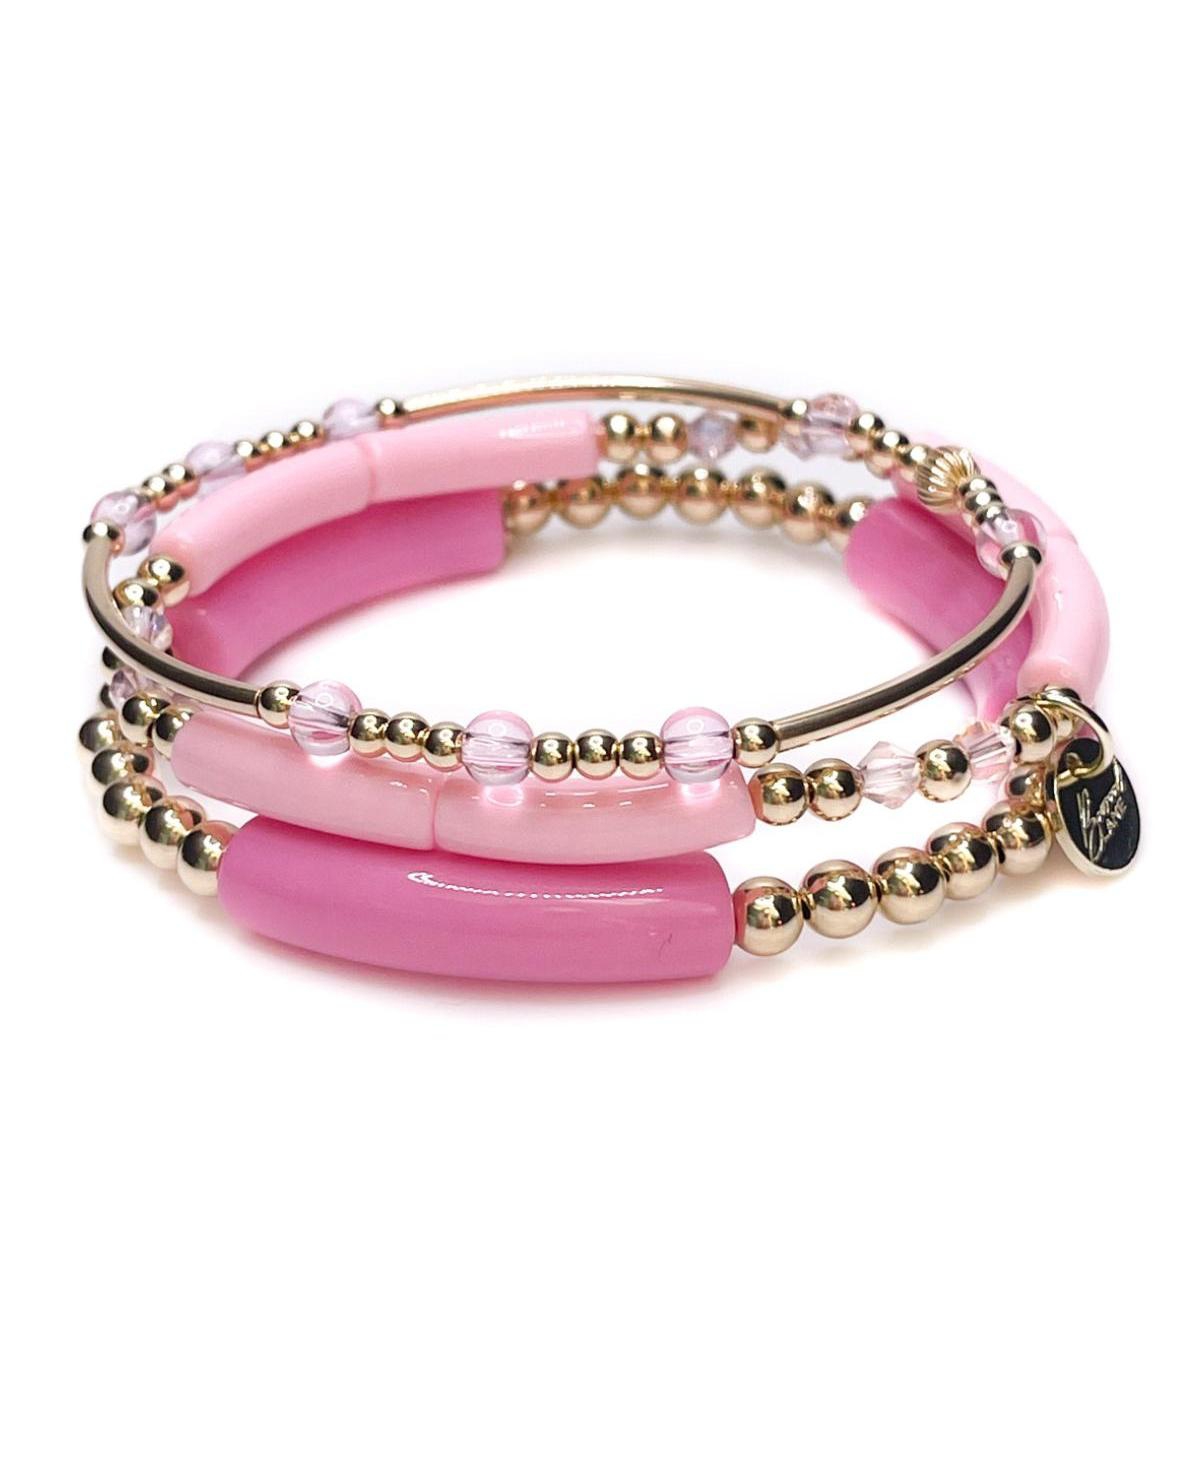 Non-Tarnishing Gold filled Ball , Gold Tube, and Acrylic Stretch Bracelet Stack, 3 Pieces - Pink